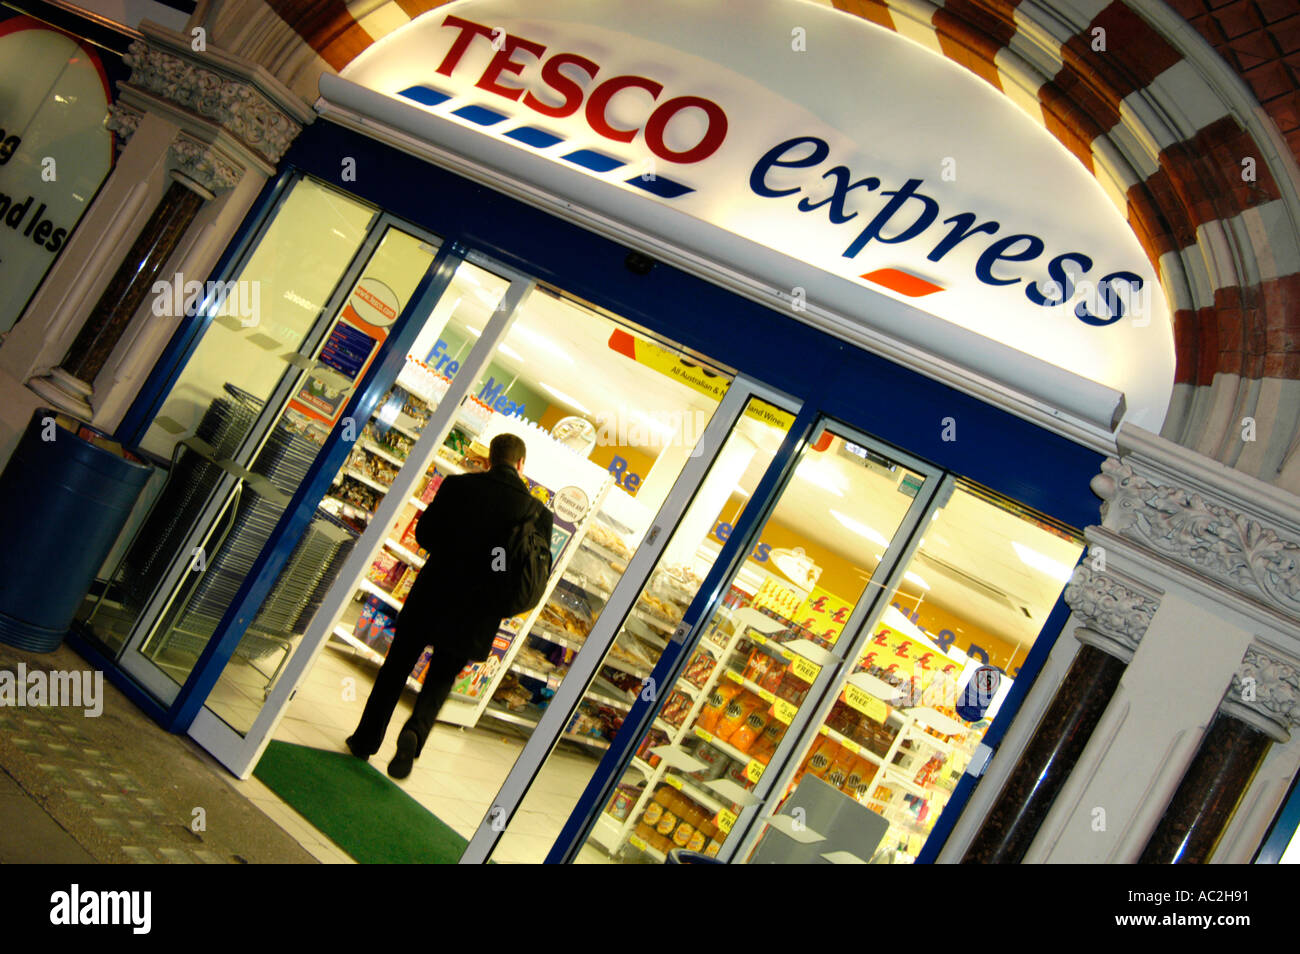 Tesco Express store at night open until late, London England UK Stock Photo